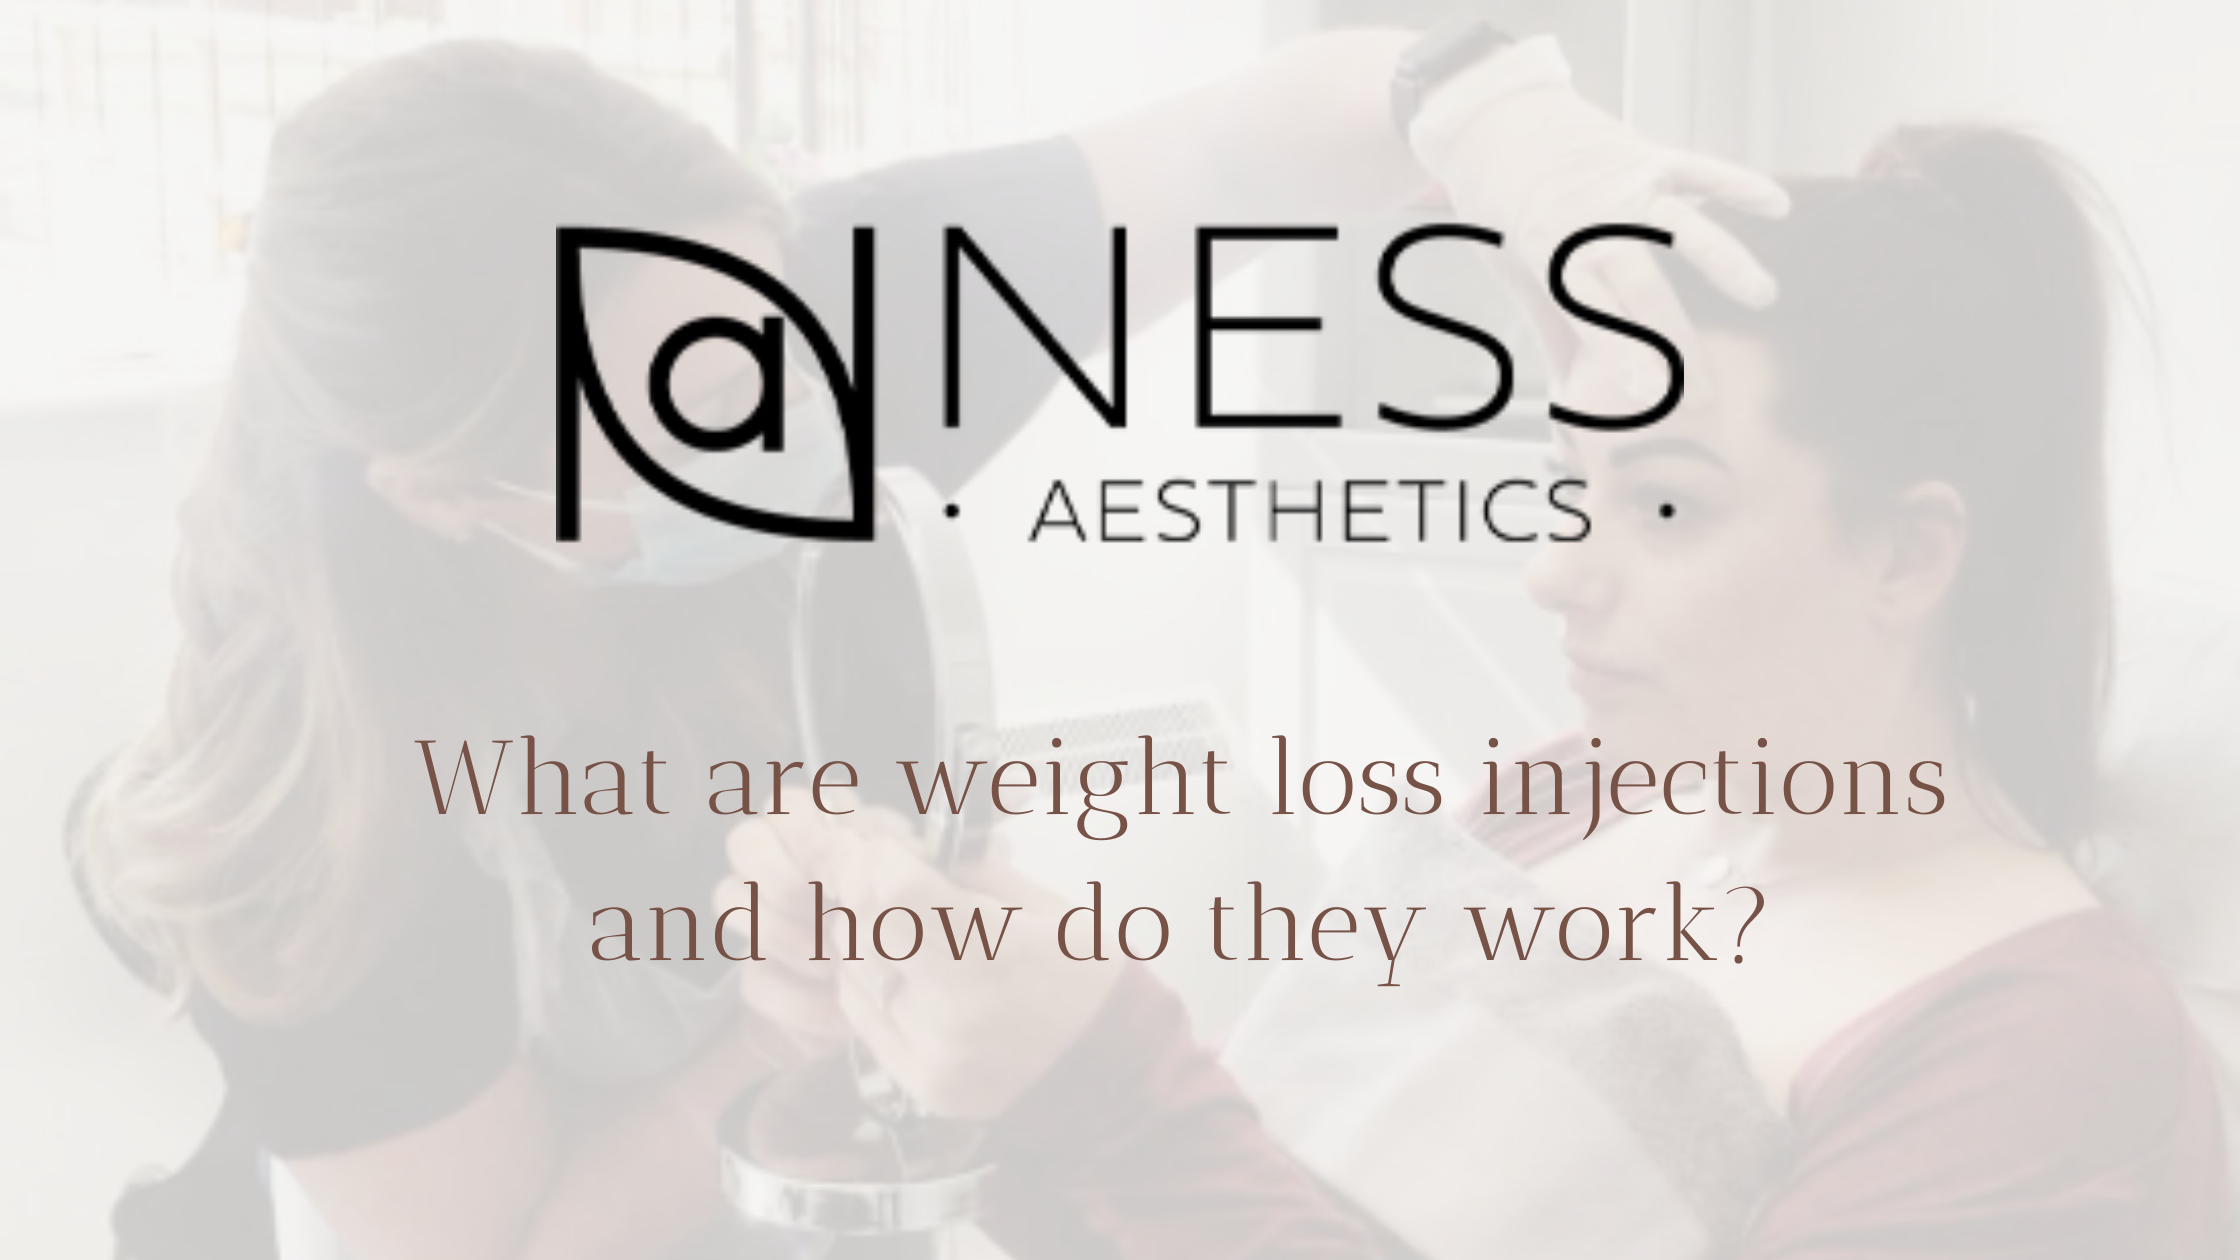 What are weight loss injections and how do they work?